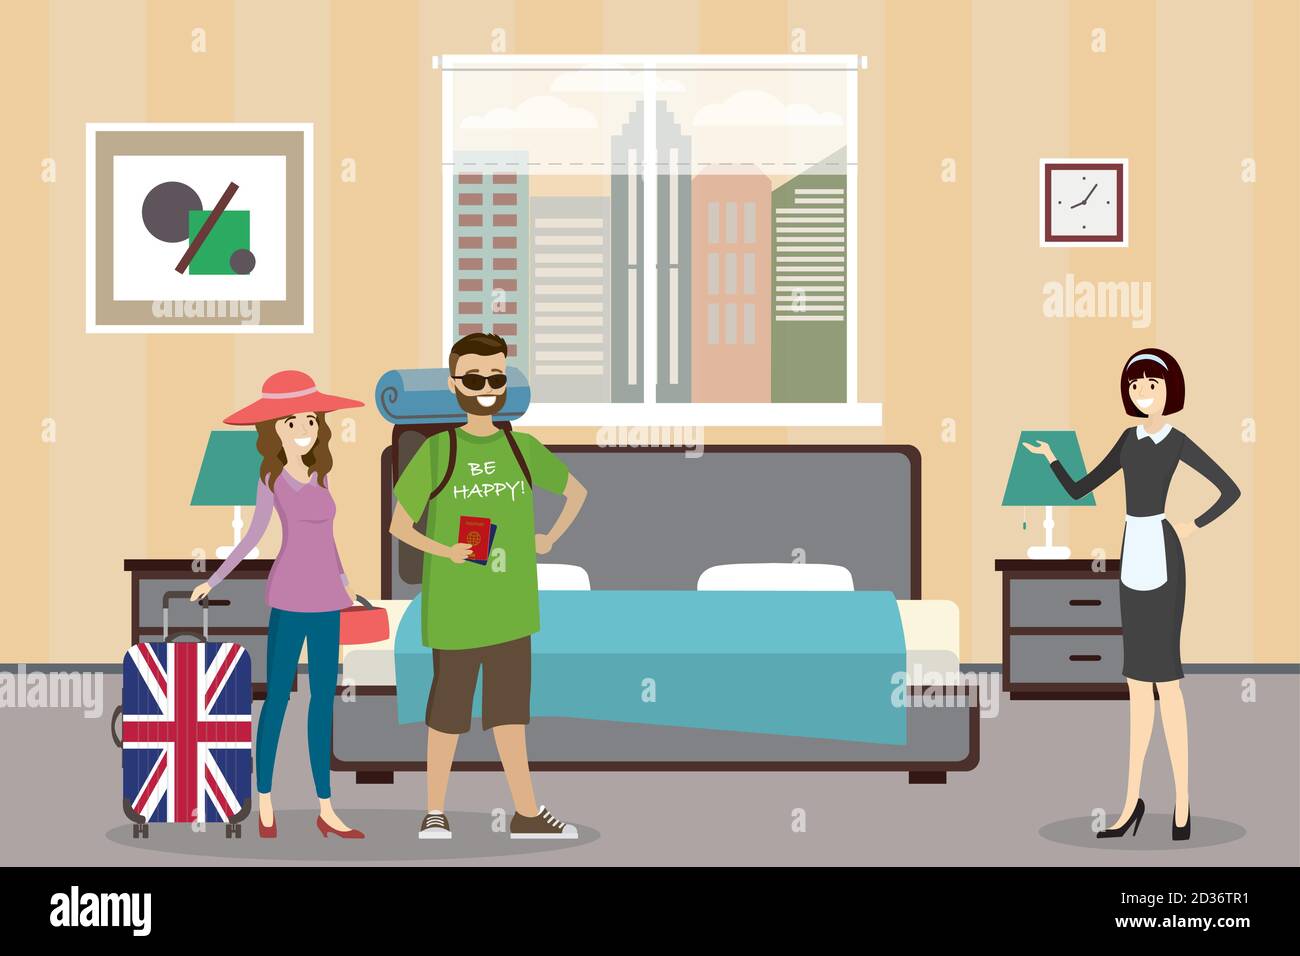 Tourists with luggage and maid in the hotel room Stock Vector